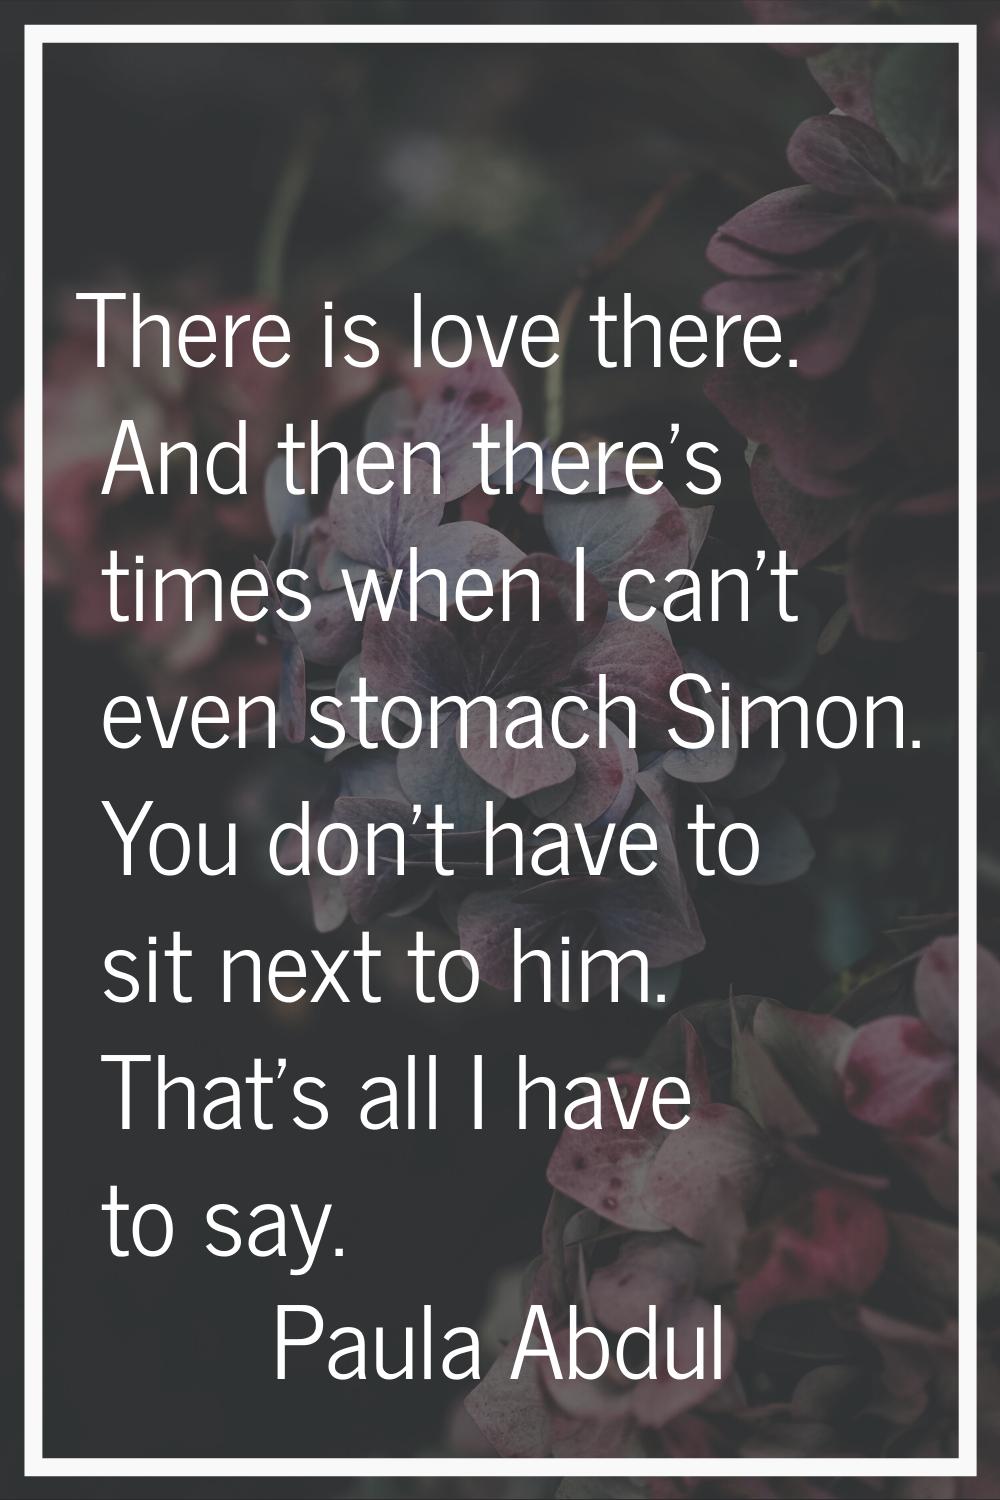 There is love there. And then there's times when I can't even stomach Simon. You don't have to sit 